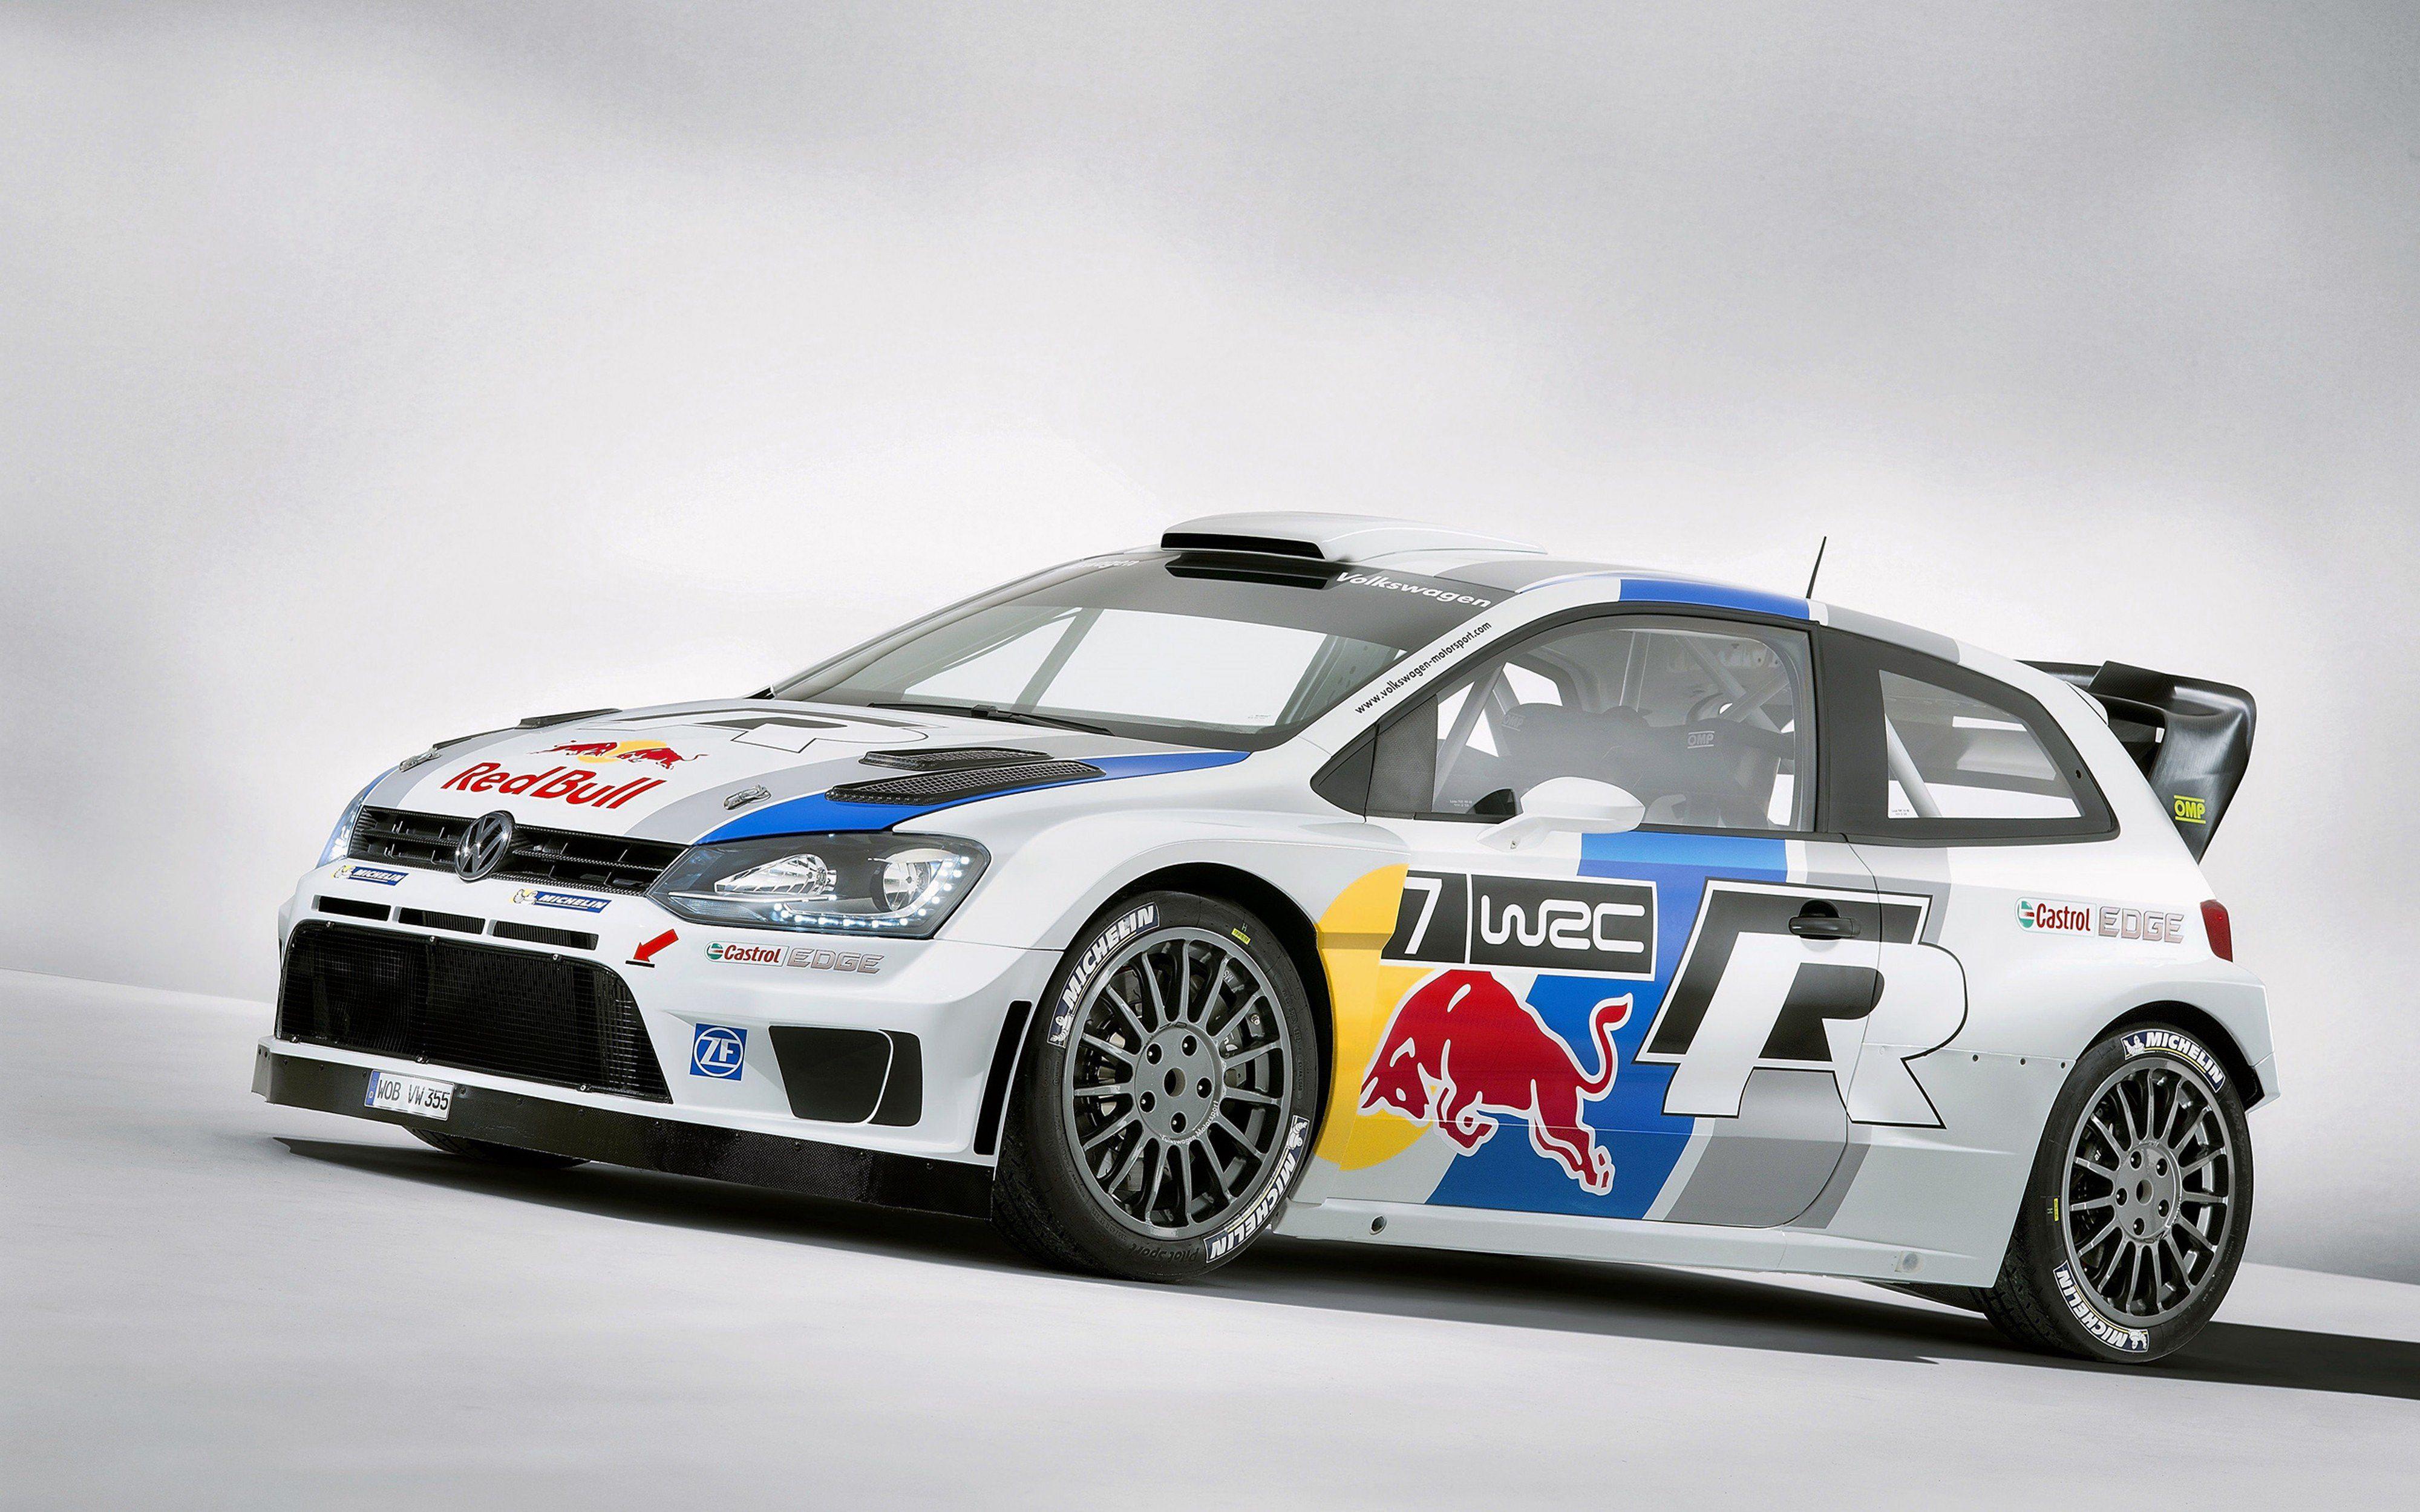 Rally Car Volkswagen Wallpaper HD. All About Gallery Car